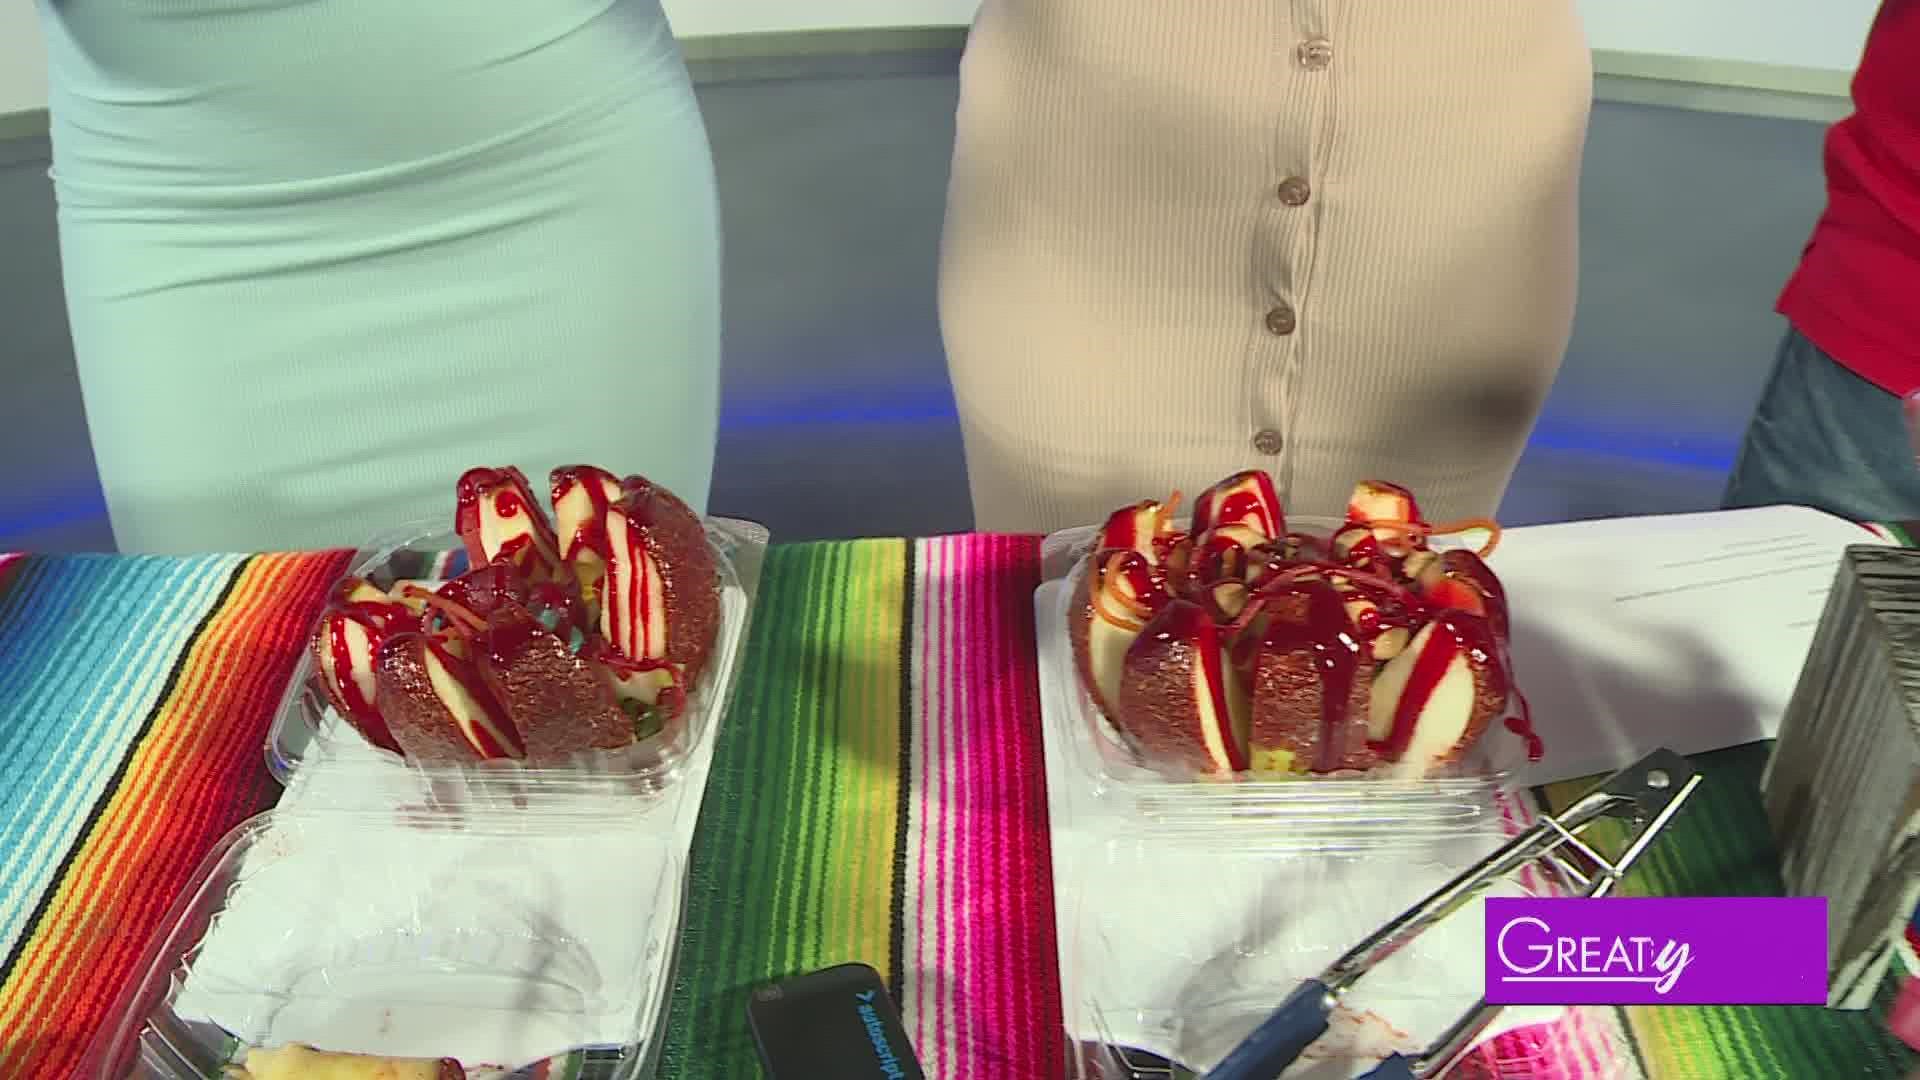 Chamoy is a staple of the Latino culture, but even more so here in the Alamo City. Pako walks us through the makings of this delightful treat.